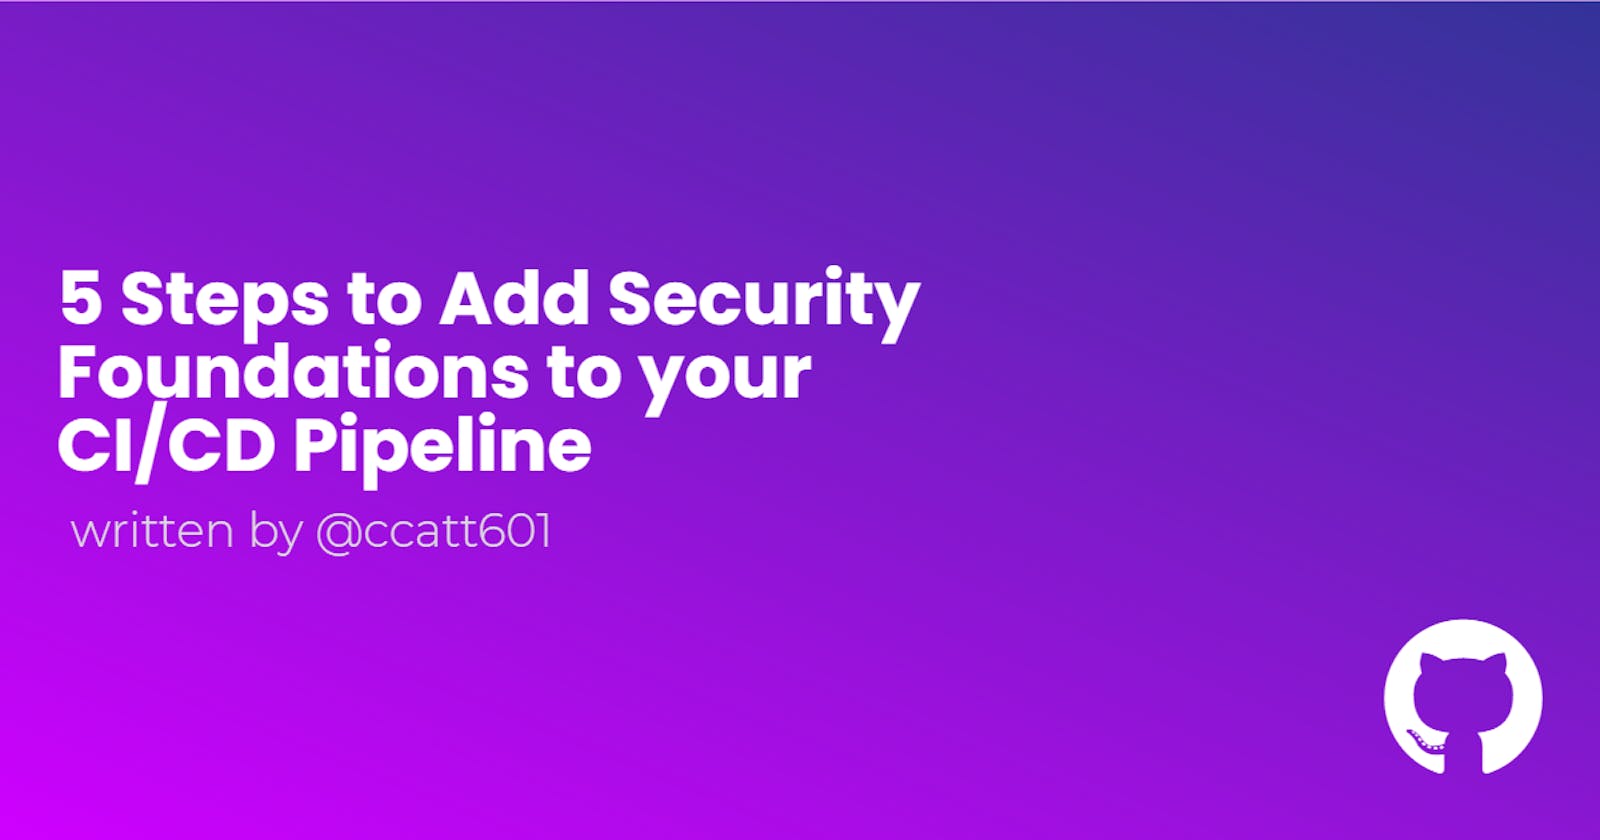 5 Steps to Add Security Foundations to your CI/CD Pipeline